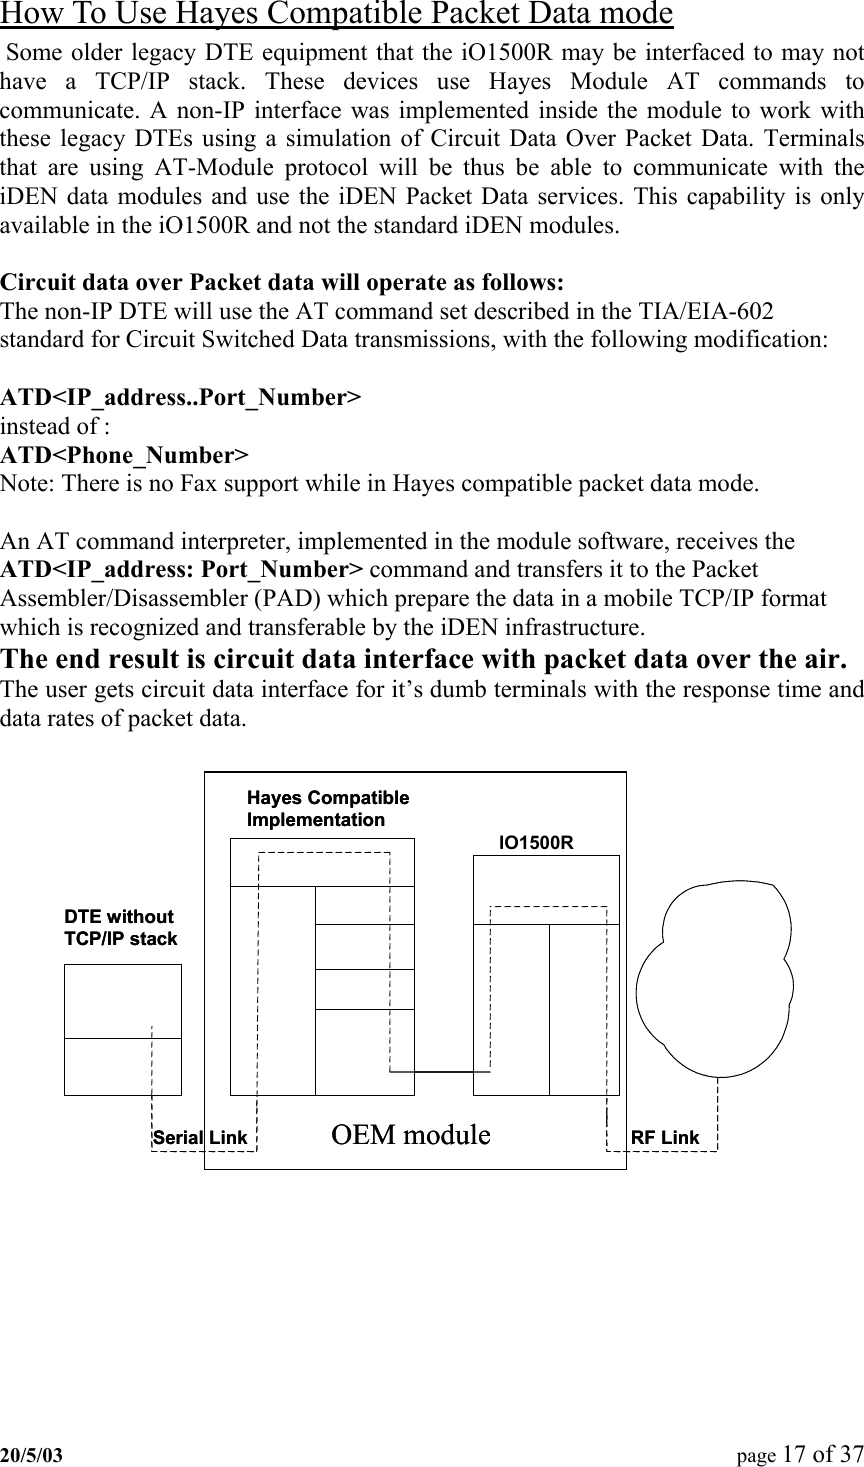 How To Use Hayes Compatible Packet Data mode  Some older legacy DTE equipment that the iO1500R may be interfaced to may not have a TCP/IP stack. These devices use Hayes Module AT commands to communicate. A non-IP interface was implemented inside the module to work with these legacy DTEs using a simulation of Circuit Data Over Packet Data. Terminals that are using AT-Module protocol will be thus be able to communicate with the iDEN data modules and use the iDEN Packet Data services. This capability is only available in the iO1500R and not the standard iDEN modules.  Circuit data over Packet data will operate as follows:  The non-IP DTE will use the AT command set described in the TIA/EIA-602 standard for Circuit Switched Data transmissions, with the following modification:  ATD&lt;IP_address..Port_Number&gt;     instead of : ATD&lt;Phone_Number&gt; Note: There is no Fax support while in Hayes compatible packet data mode.  An AT command interpreter, implemented in the module software, receives the ATD&lt;IP_address: Port_Number&gt; command and transfers it to the Packet Assembler/Disassembler (PAD) which prepare the data in a mobile TCP/IP format which is recognized and transferable by the iDEN infrastructure. The end result is circuit data interface with packet data over the air. The user gets circuit data interface for it’s dumb terminals with the response time and data rates of packet data.  RS232 RS232 AT modem AT modem ApplicationApplication LAPiLAPiSerial Link Serial Link RF Link RF Link DTE without DTE without TCP/IP stackTCP/IP stackIO1500RInfrastructure Infrastructure IPIPAT Interface  AT Interface  IP to IPIP to IPInterfaceInterfaceRS232 RS232 TCPTCPIPIPPADPADHayes CompatibleHayes CompatibleImplementationImplementationOEM module OEM module  20/5/03  page 17 of 37   